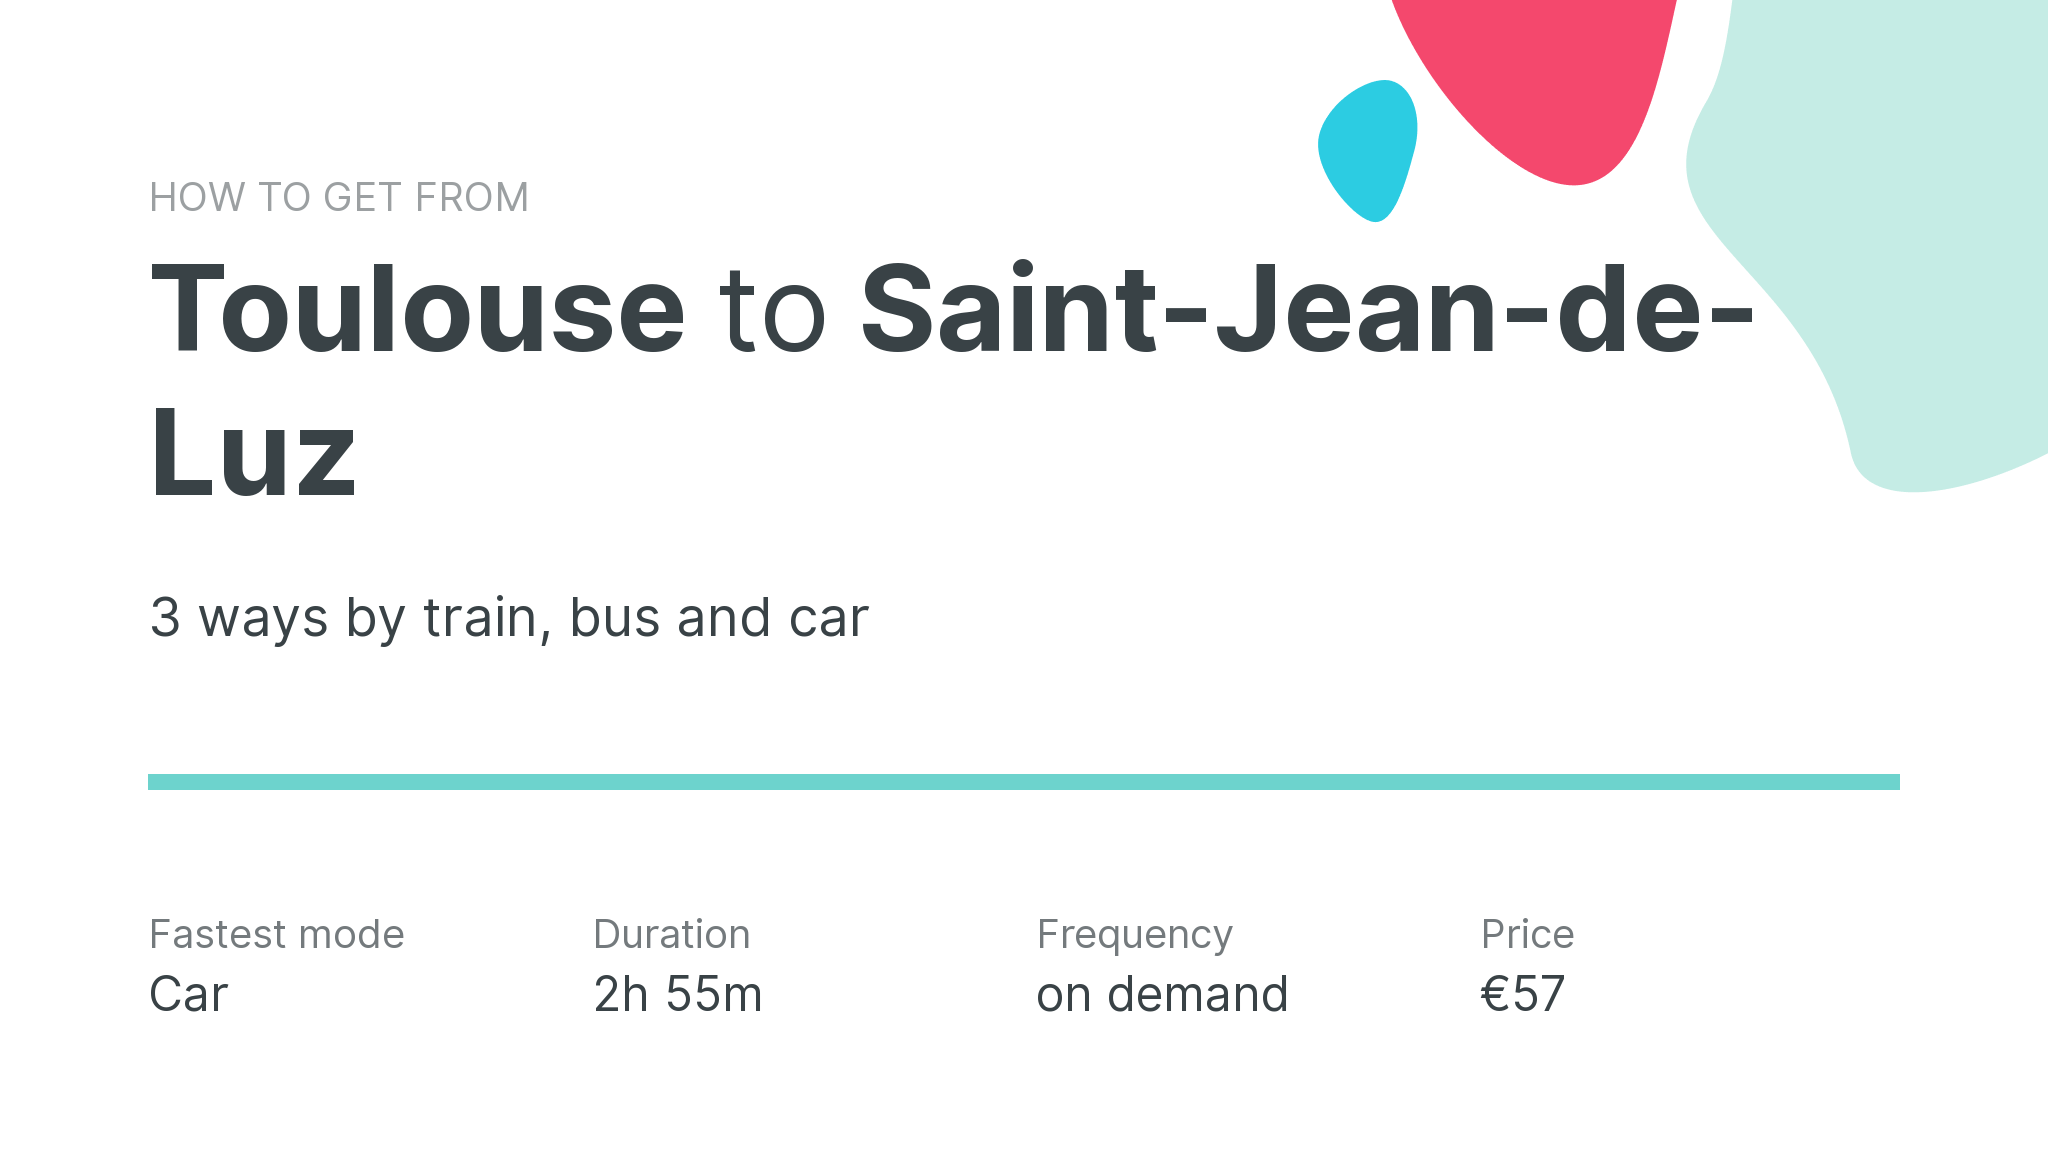 How do I get from Toulouse to Saint-Jean-de-Luz